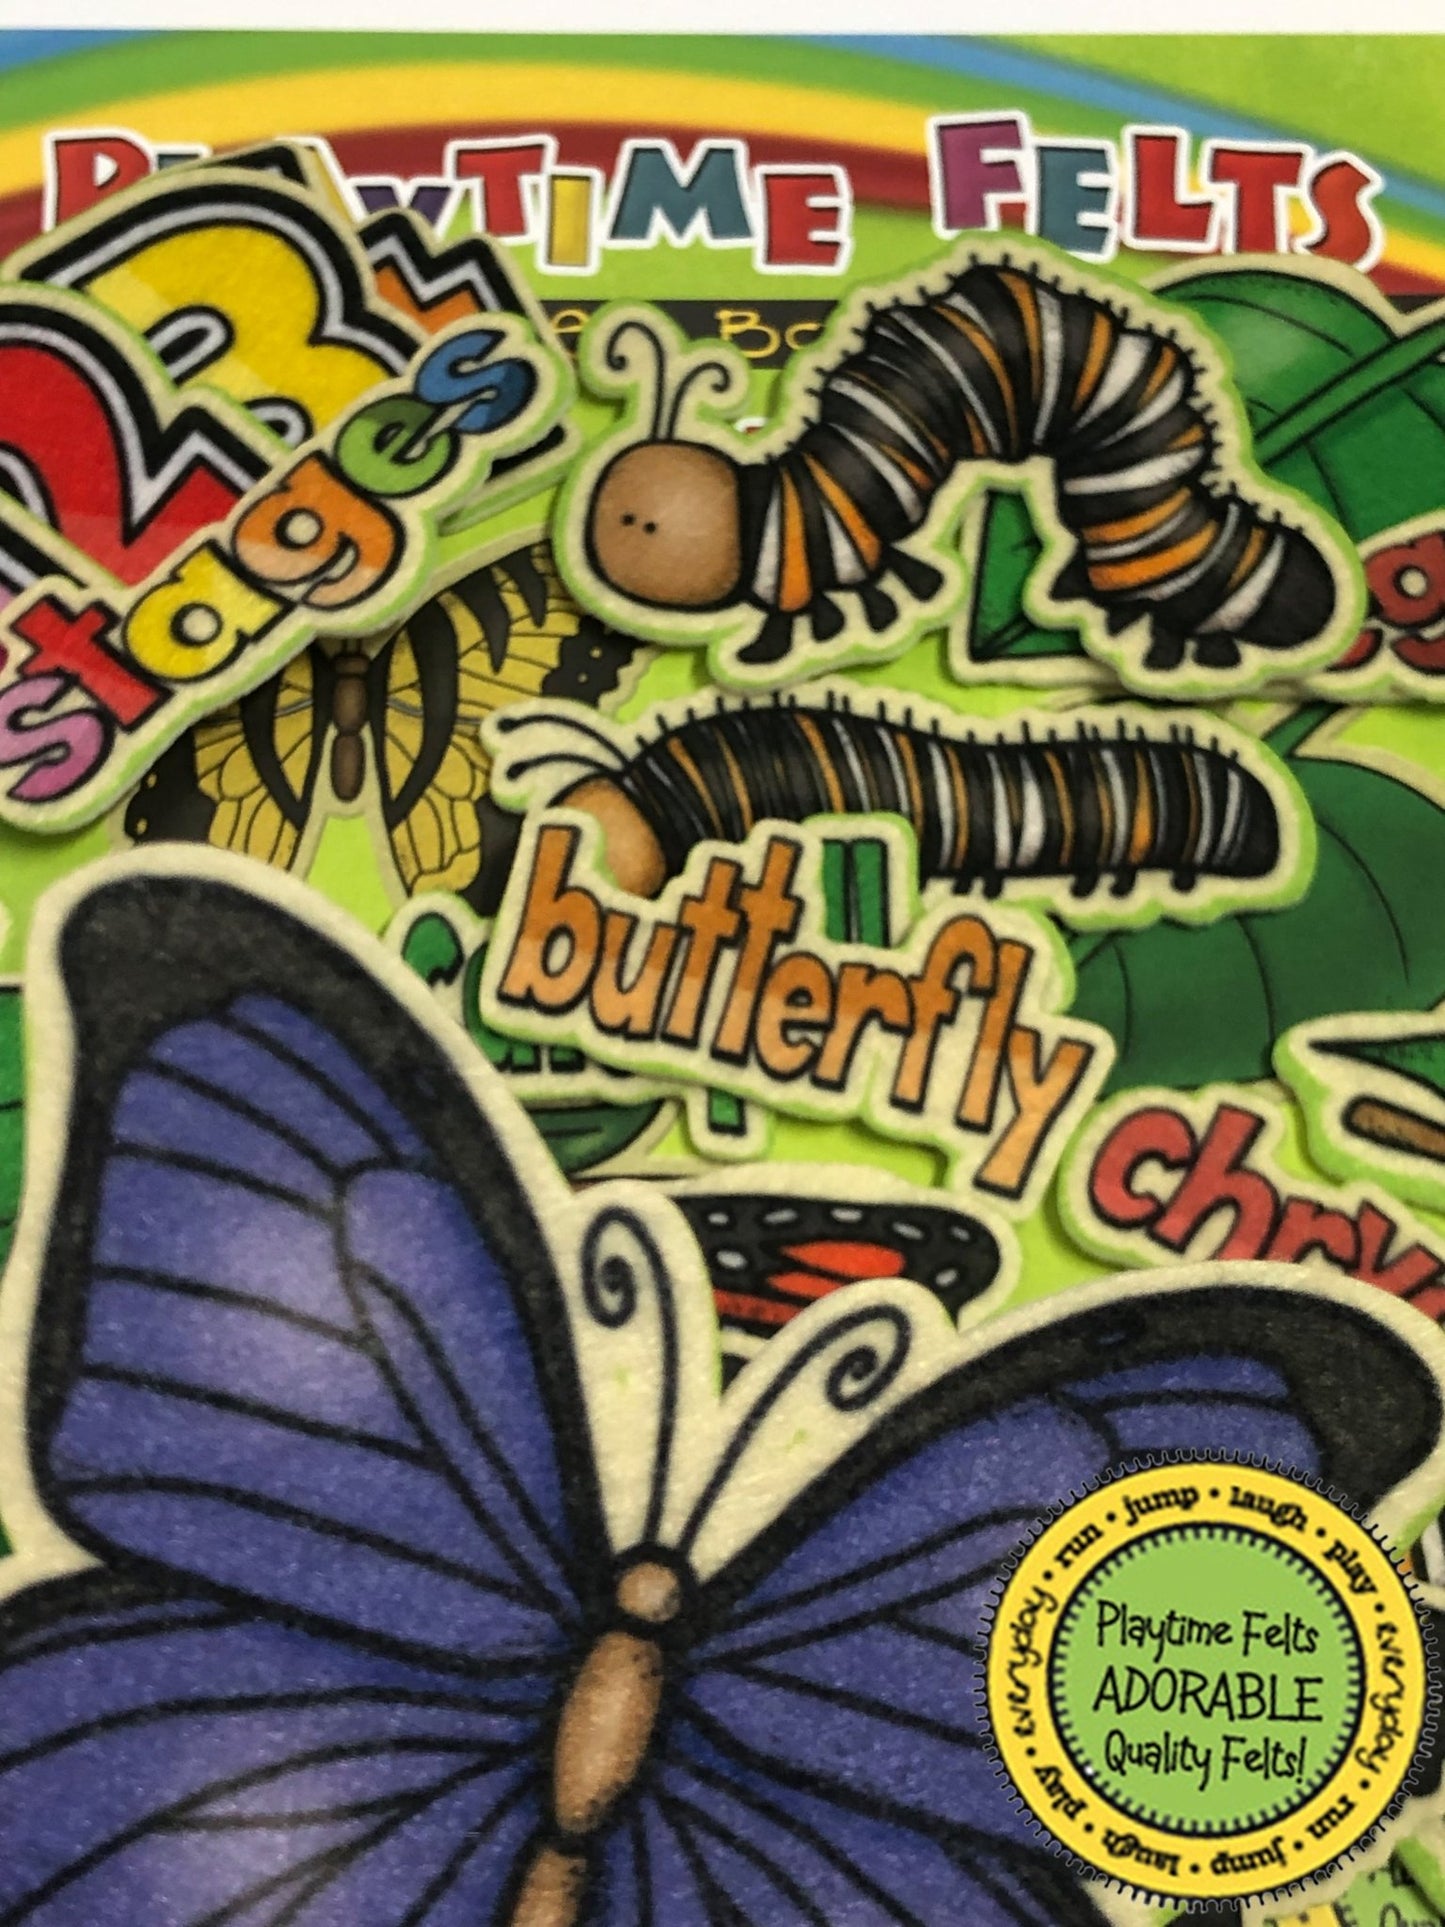 Butterfly Life Cycle | Felt Board Story Set for Preschool - Felt Board Stories for Preschool Classroom Playtime Felts